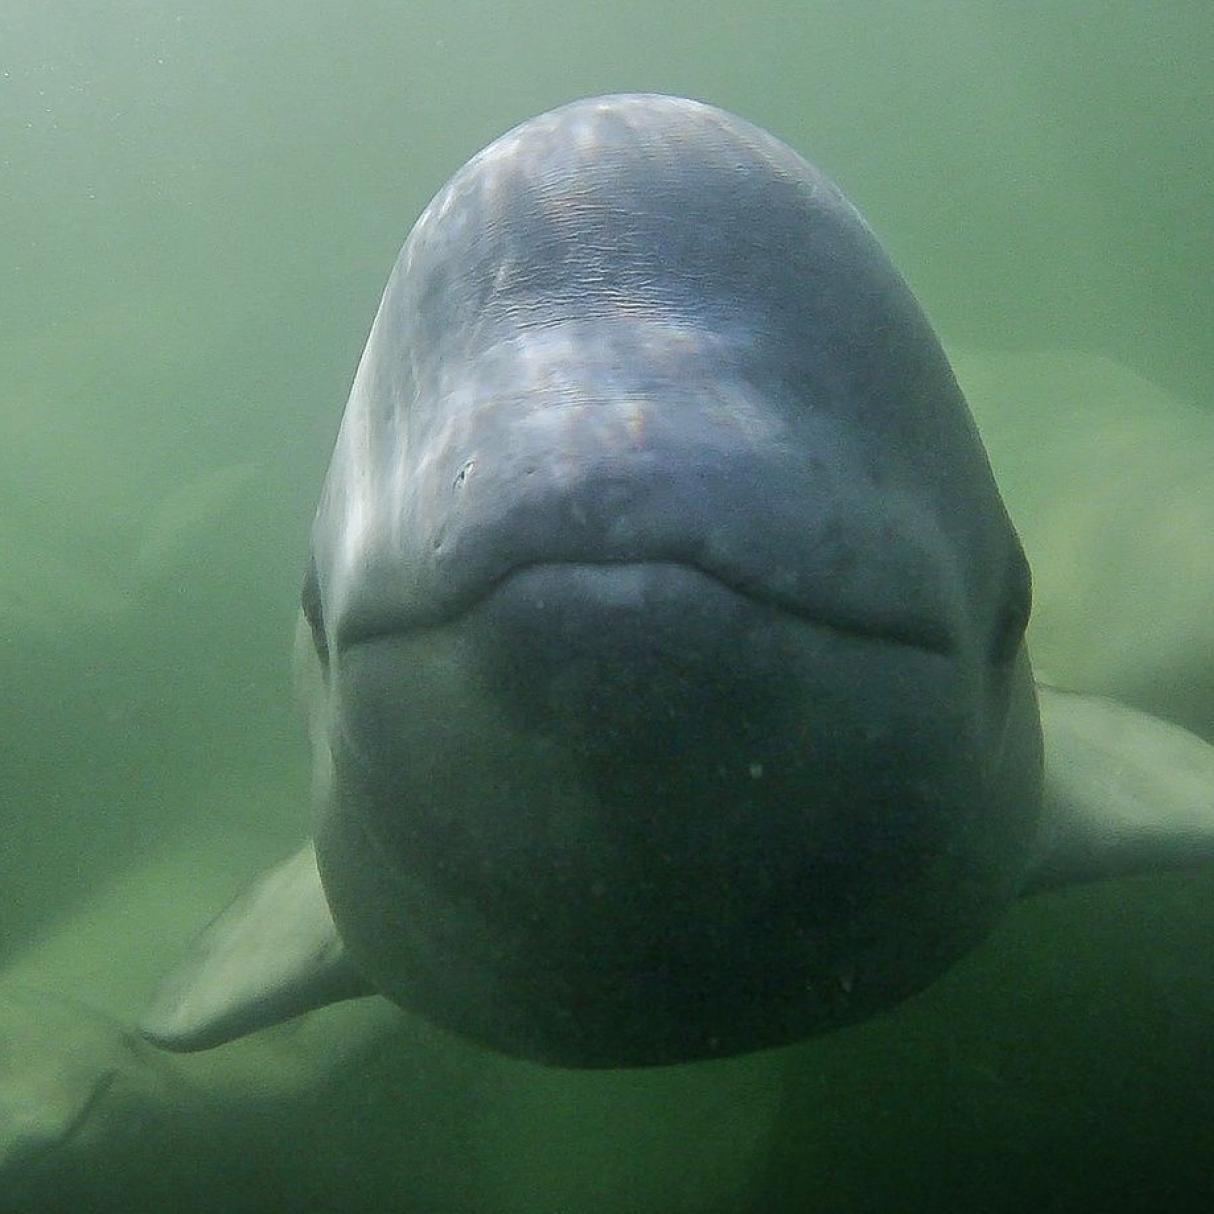 A grey beluga whale looks towards an underwater camera.